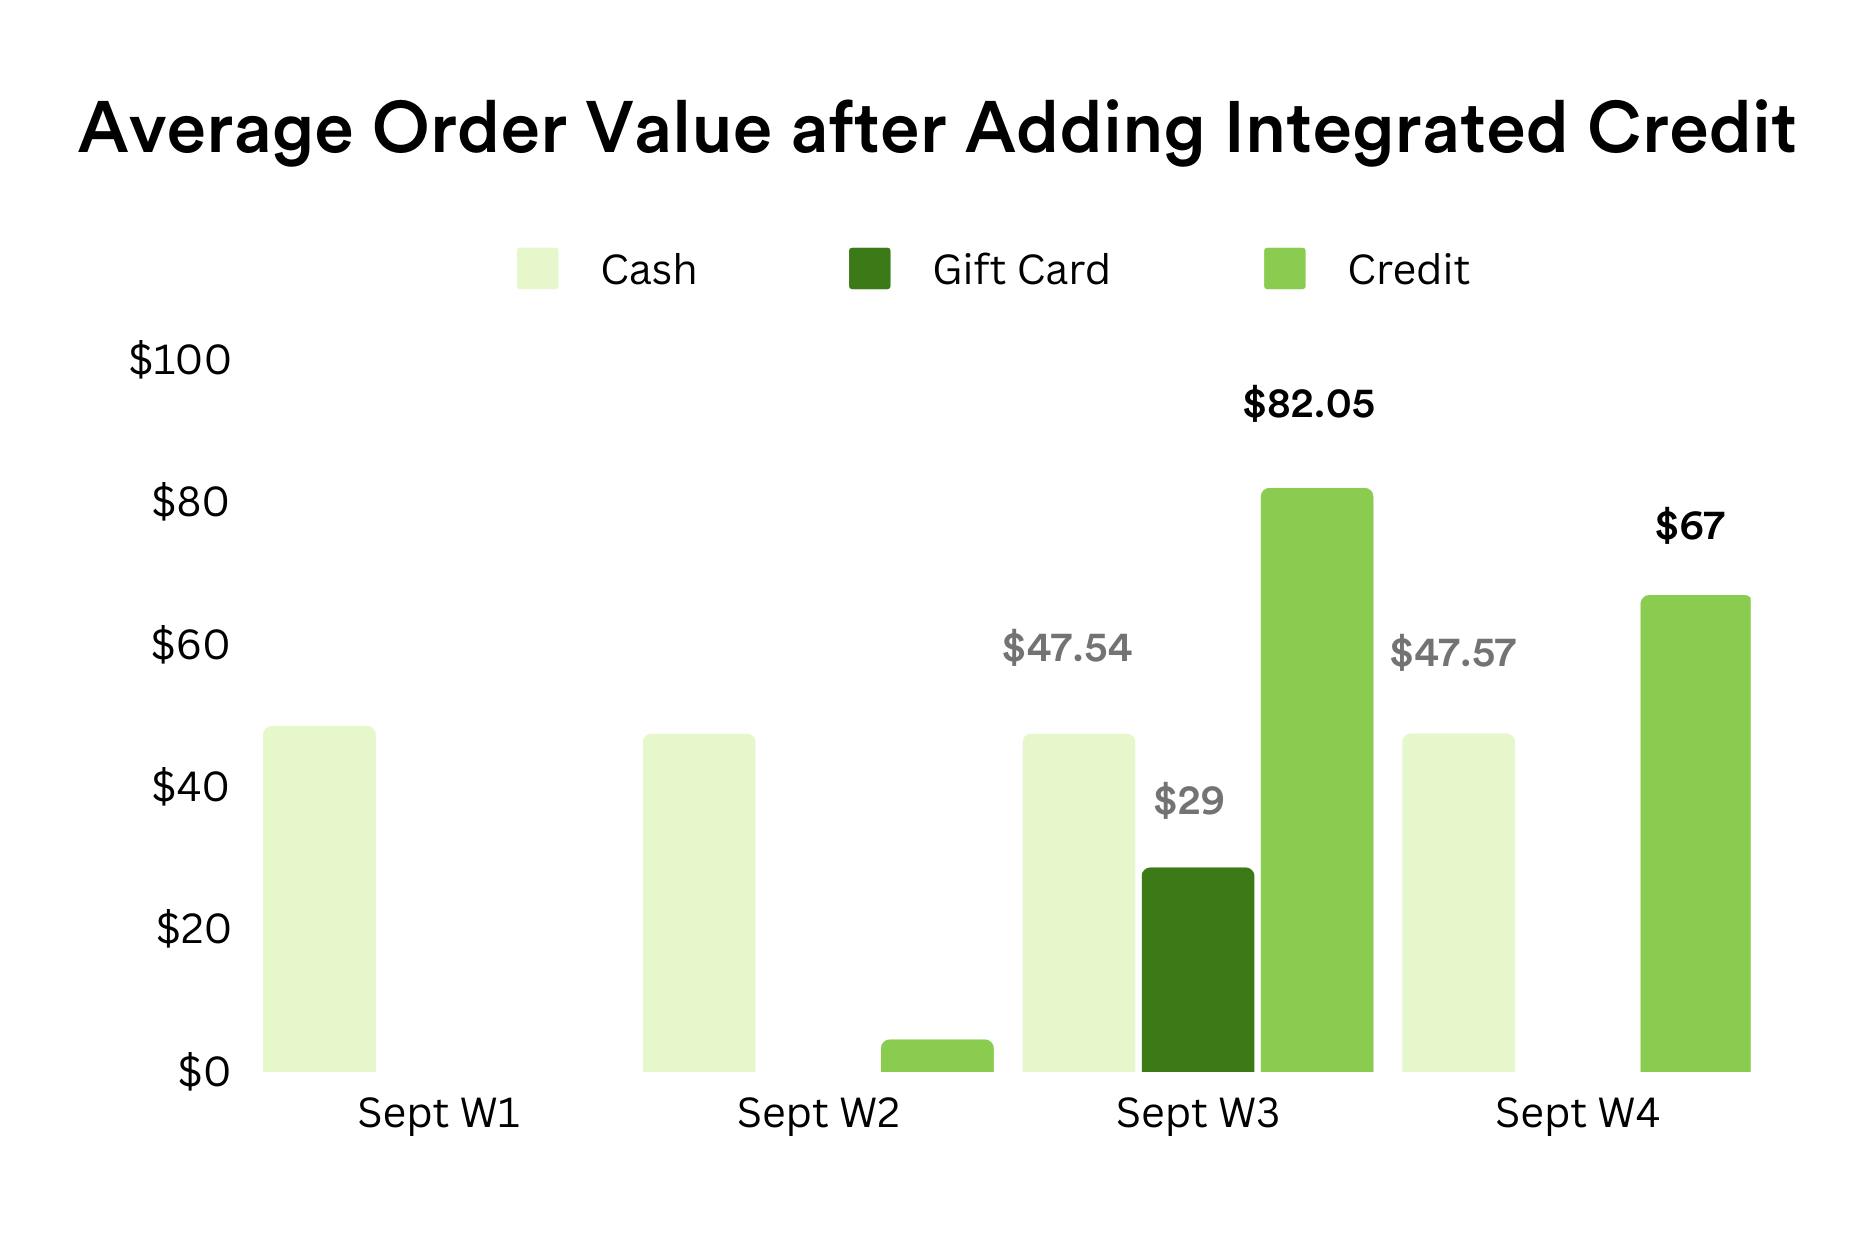 The image is a bar chart titled "Average Order Value after Adding Integrated Credit." It compares the average order values paid with cash, gift card, and credit across four weeks of September. The bars are color-coded: light green for cash, medium green for gift card, and dark green for credit.  In the first week, cash payments show an average order value of around $45. In the second week, there are no visible amounts for cash or gift cards, and credit is not shown. In the third week, gift card usage shows an average order value of around $30, and credit shows an average order value of $82.05. In the fourth week, cash payments have an average order value of $67. The chart indicates that credit payments have the highest average order value in the weeks they are used.